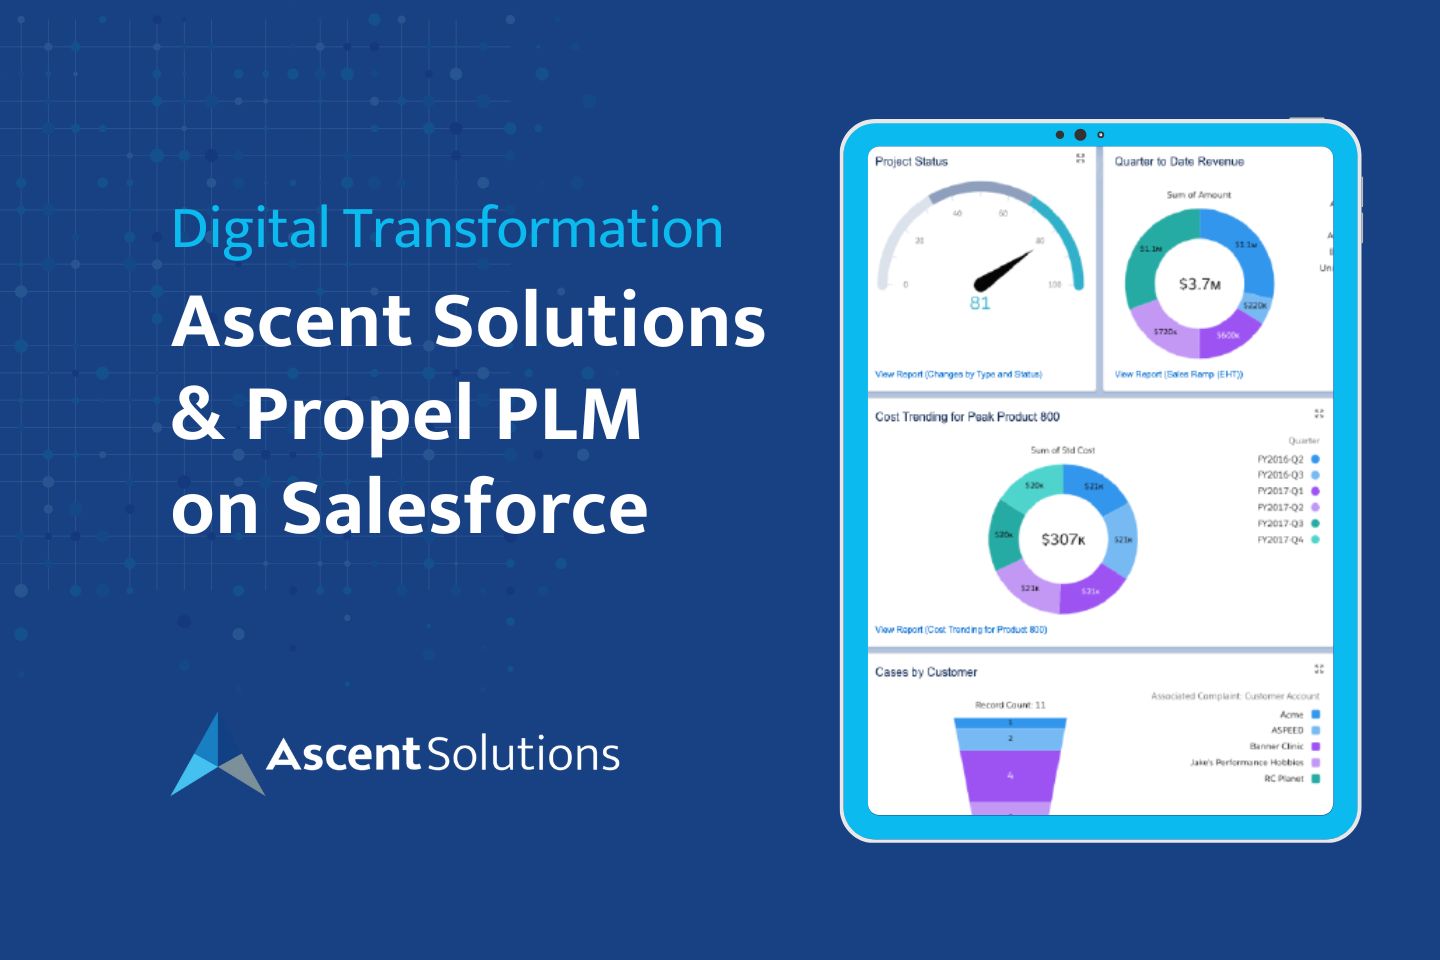 Enable Digital Transformation with Ascent Solutions Propel PLM on Salesforce